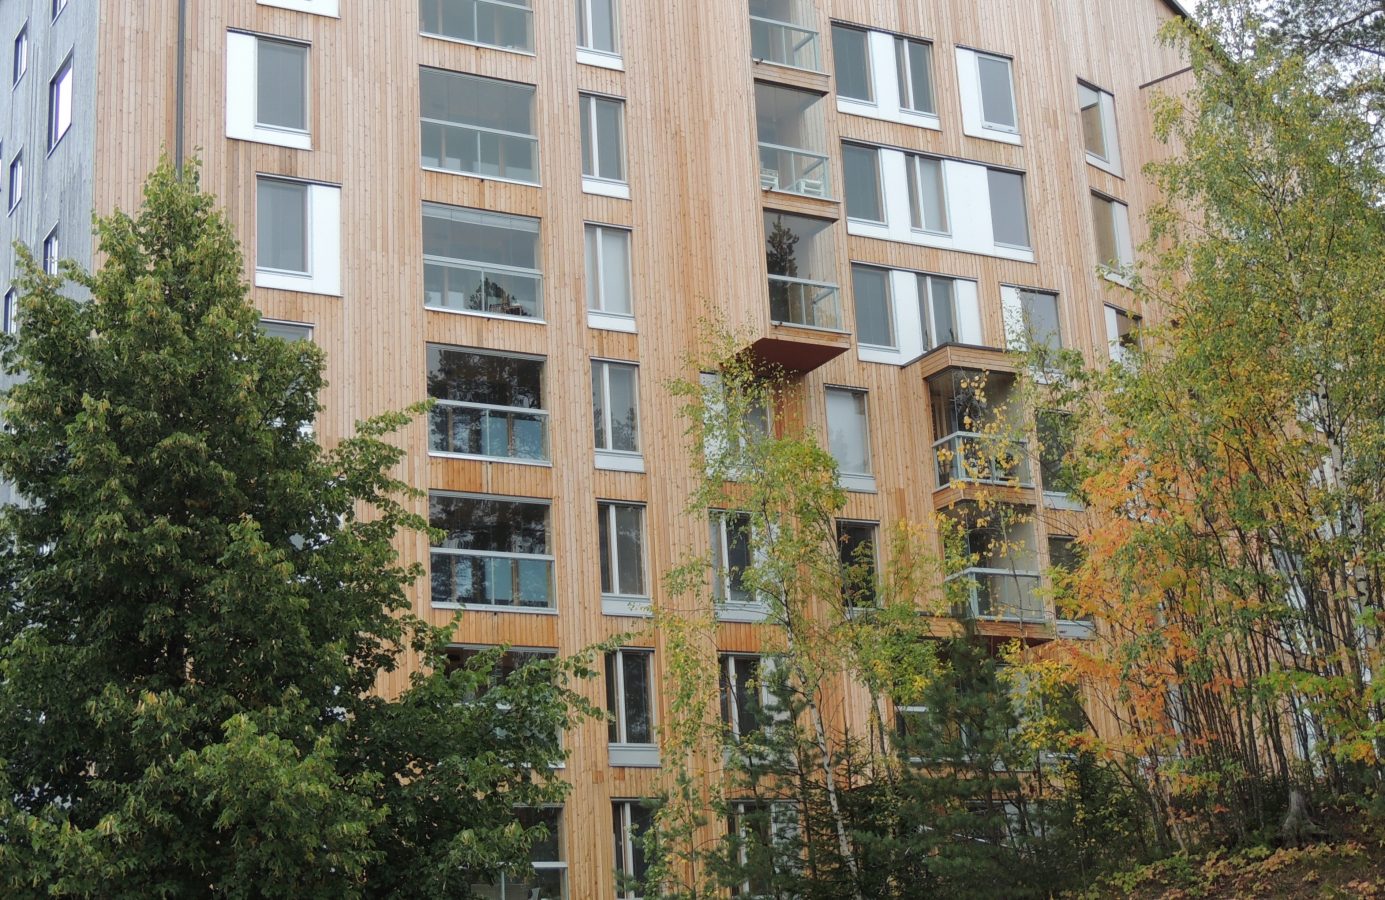 Wooden block of flats behind a number of trees.